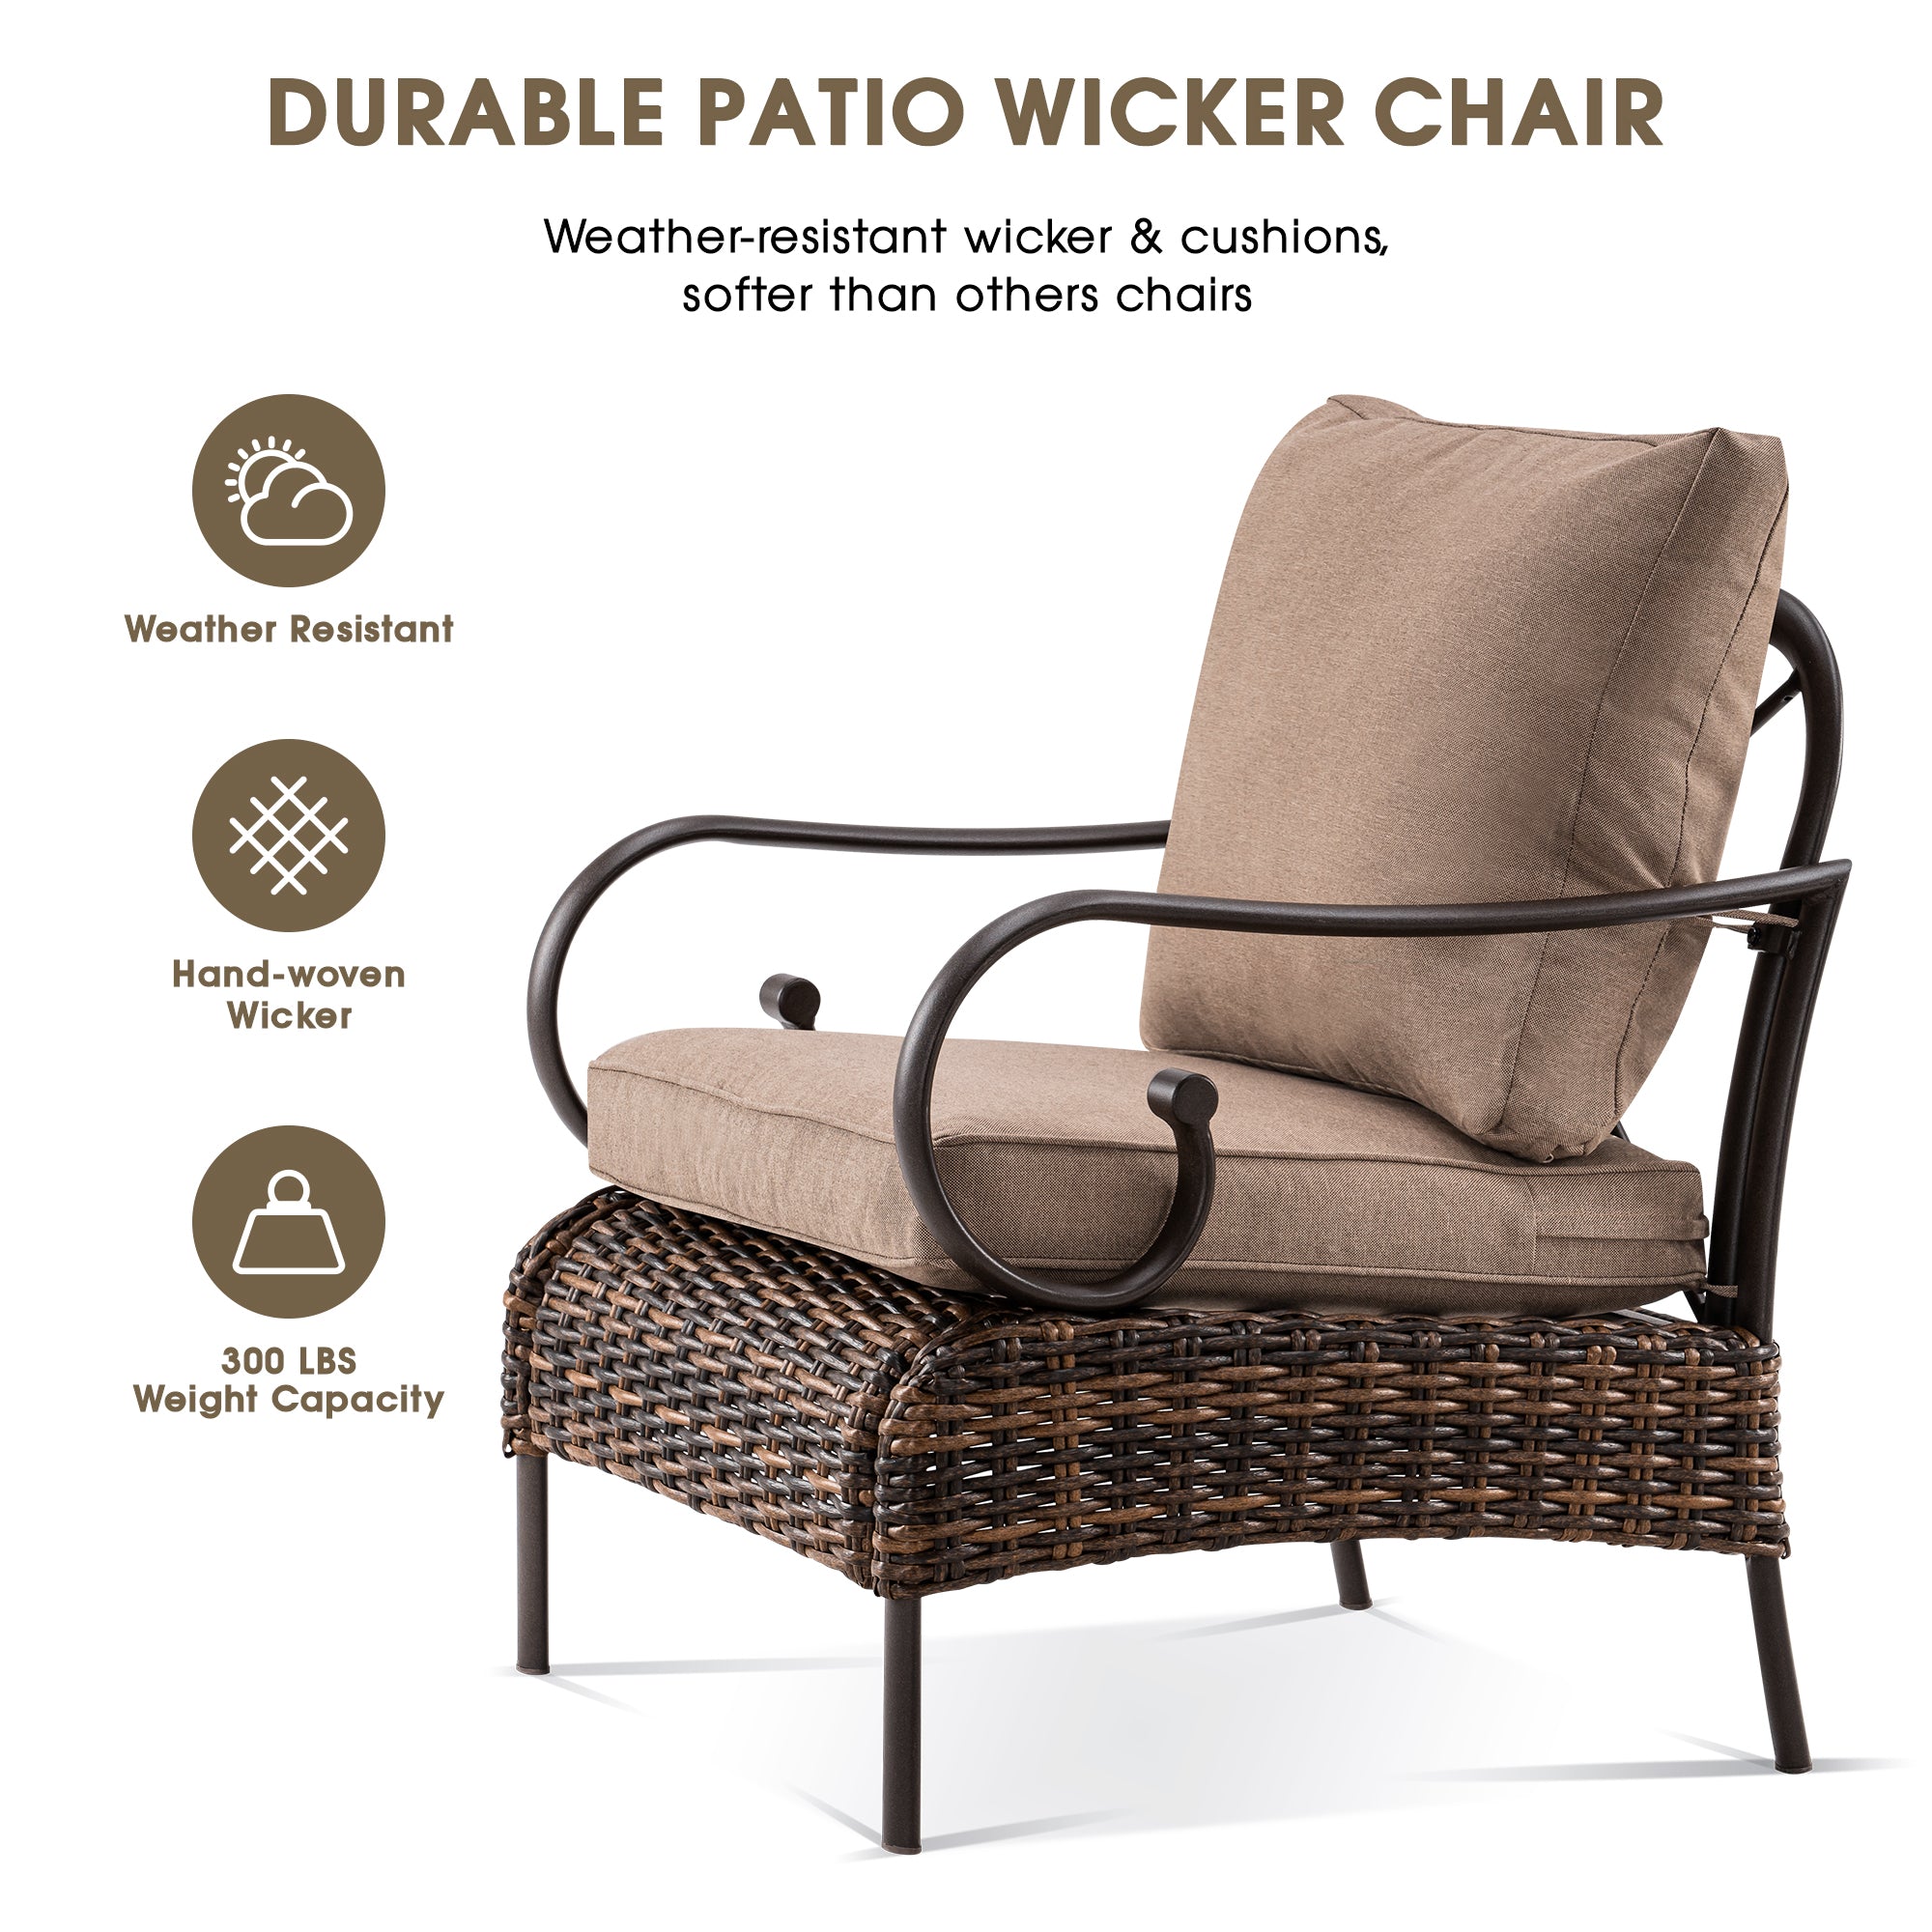 ivinta Outdoor Chair with Ottoman, Patio Wicker Chair with Fabric Cushions, 2 Piece PE Rattan Chair for Garden, Single Patio Chair Grey Lounge Chair - image 4 of 8